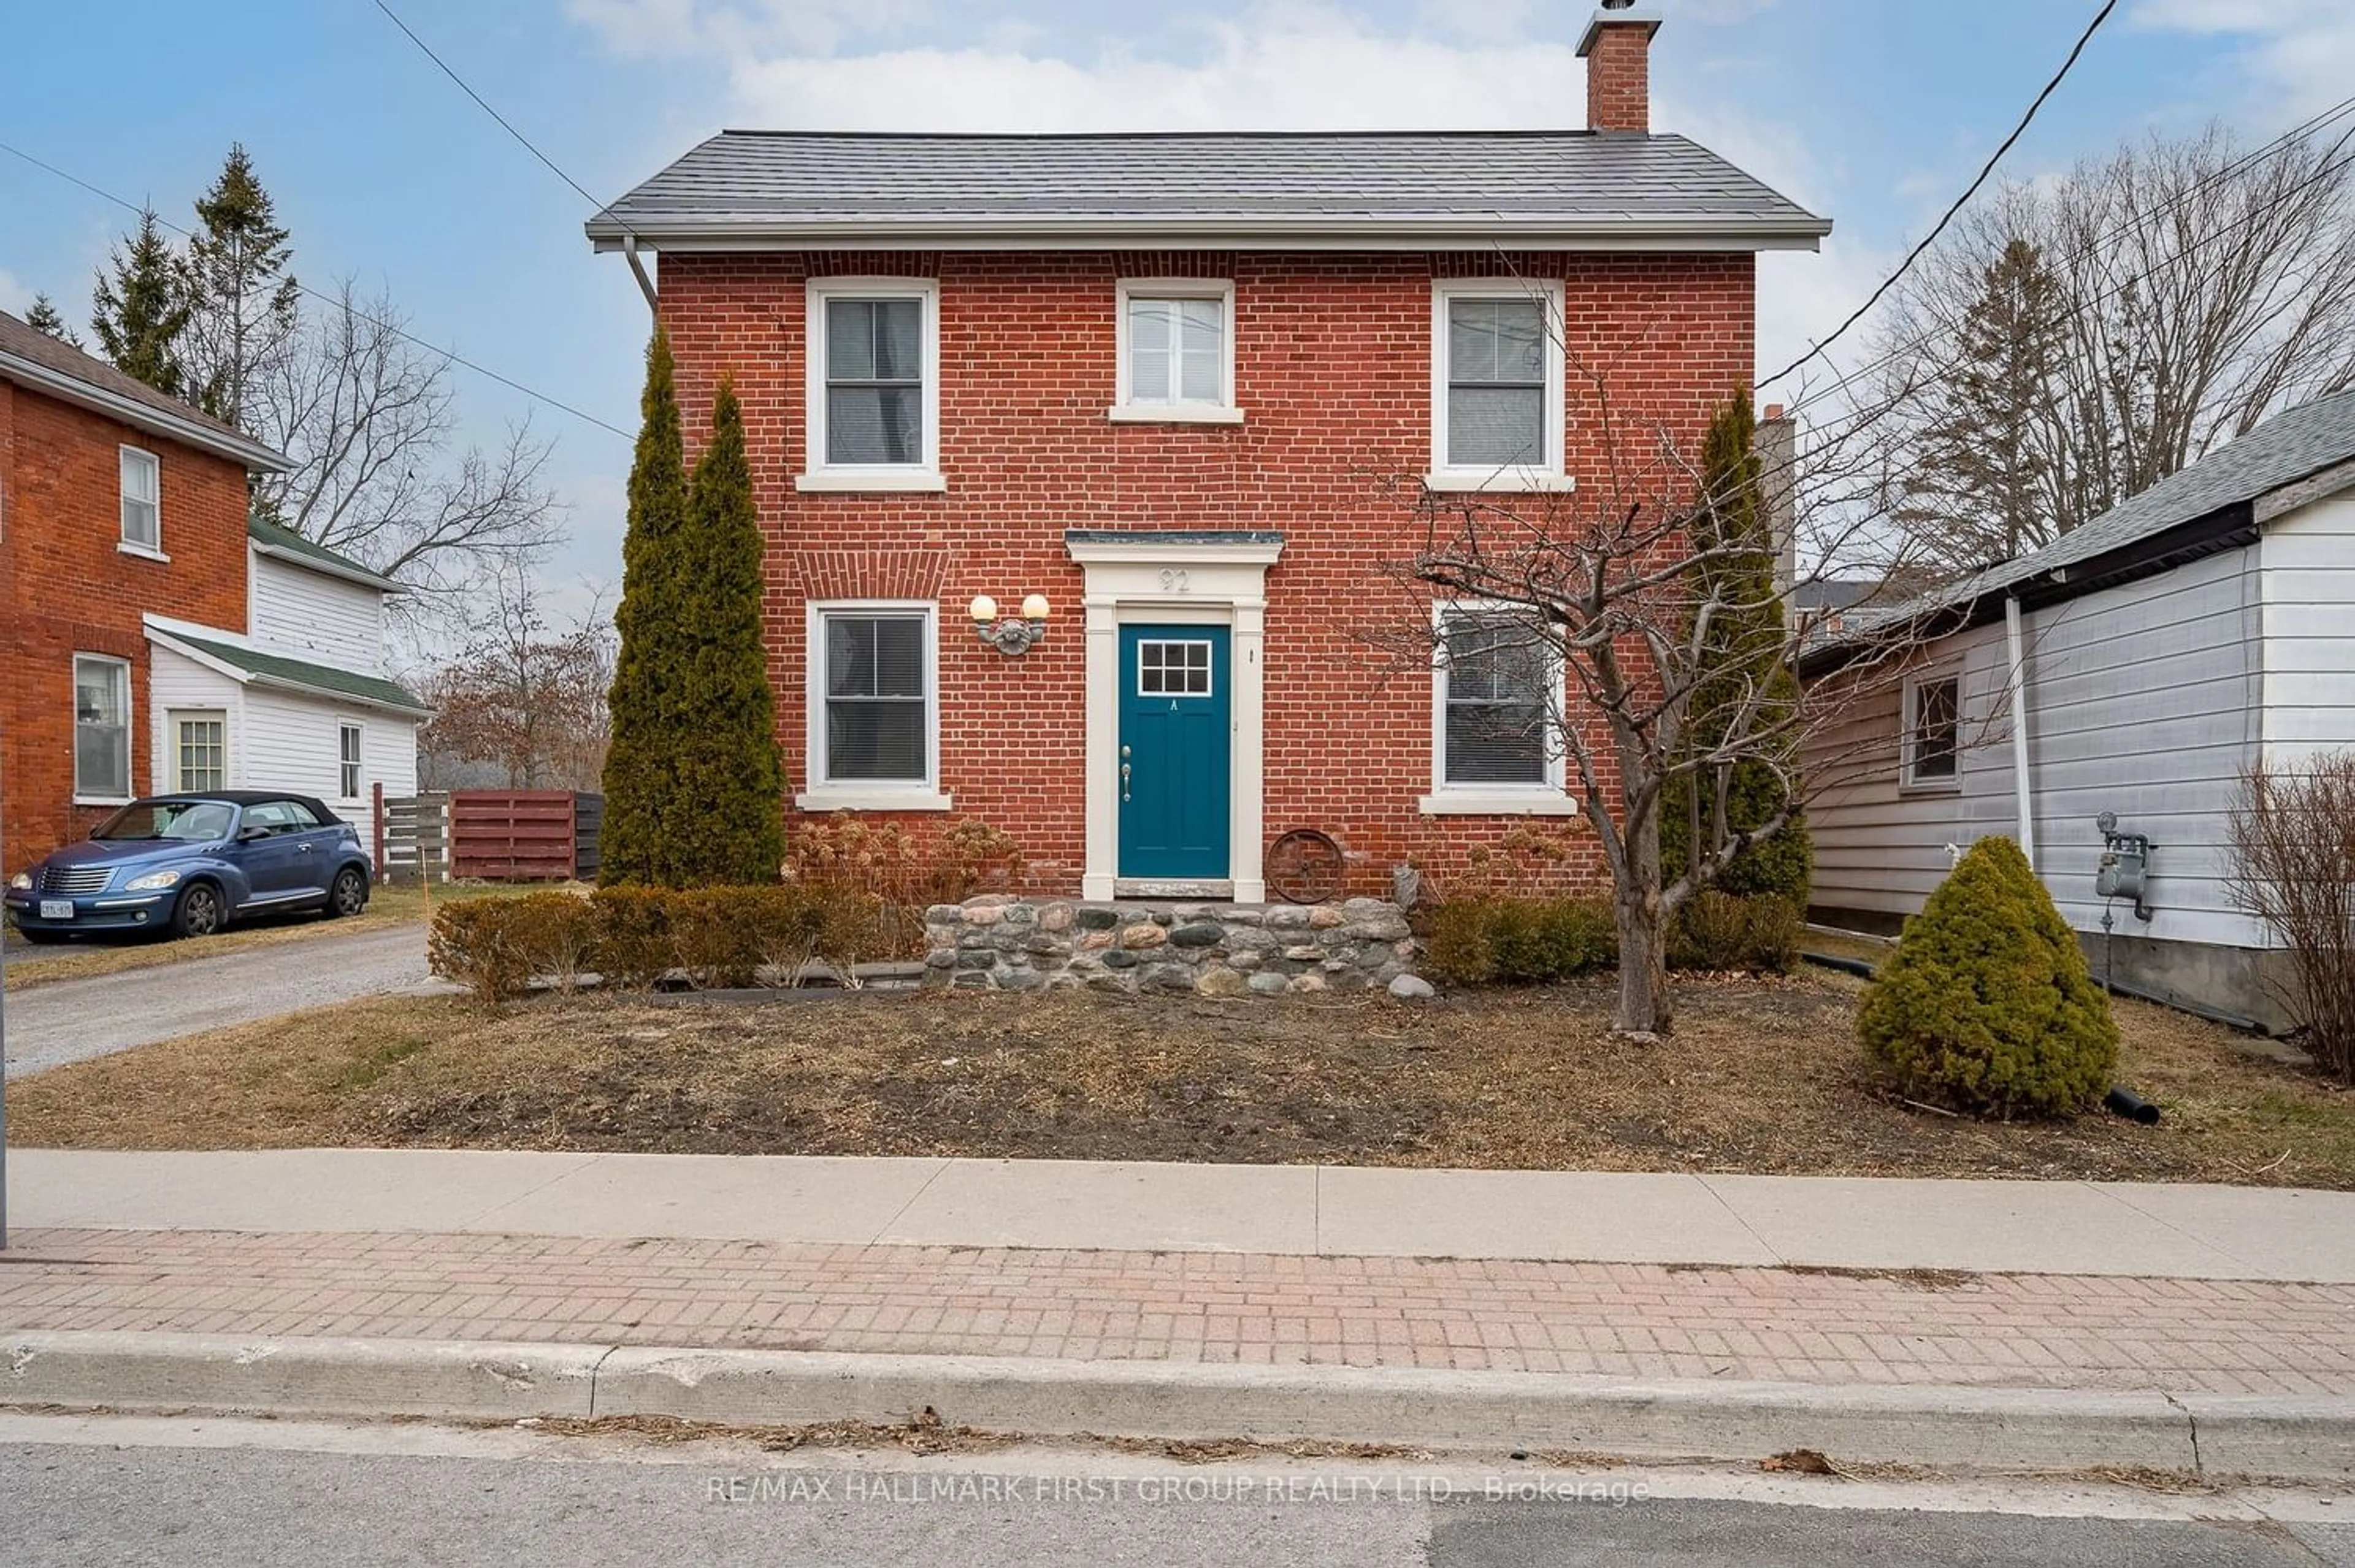 Home with brick exterior material for 92 Orange St, Cobourg Ontario K9A 2L3